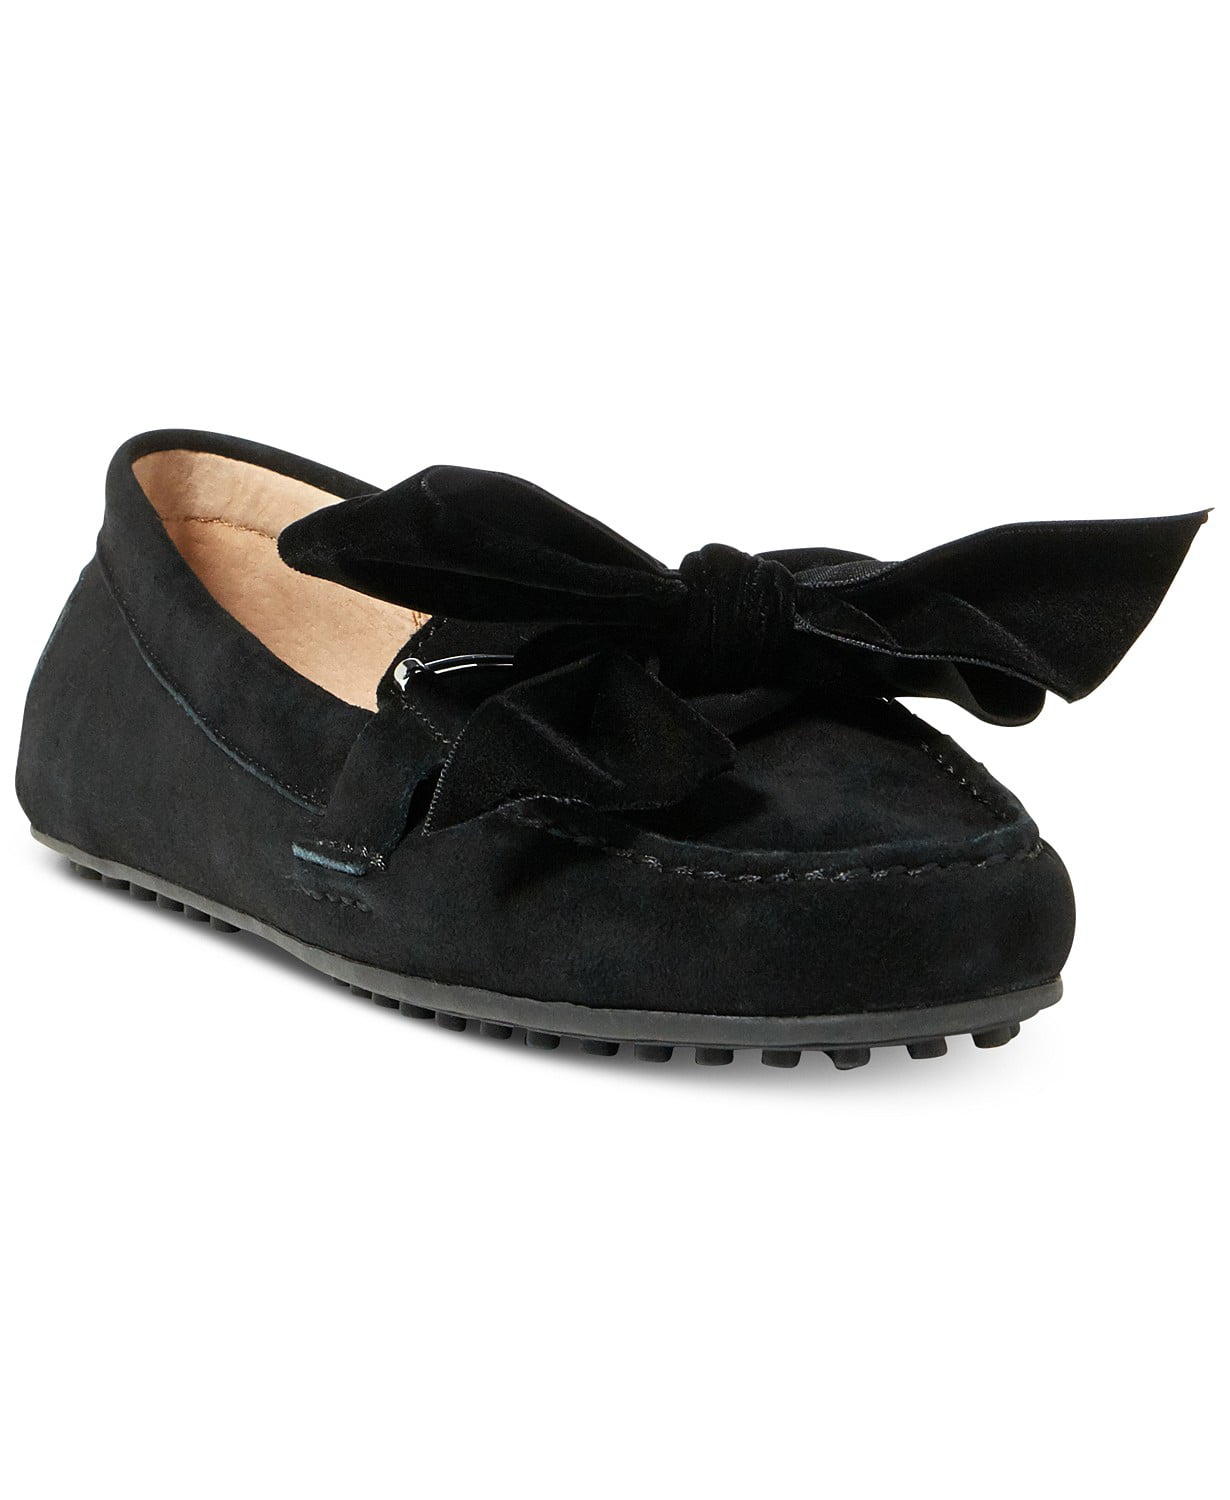 SheSole Women's Flats Velvet Loafers with Chain Decoration Casual Slip On Driving Shoes Black